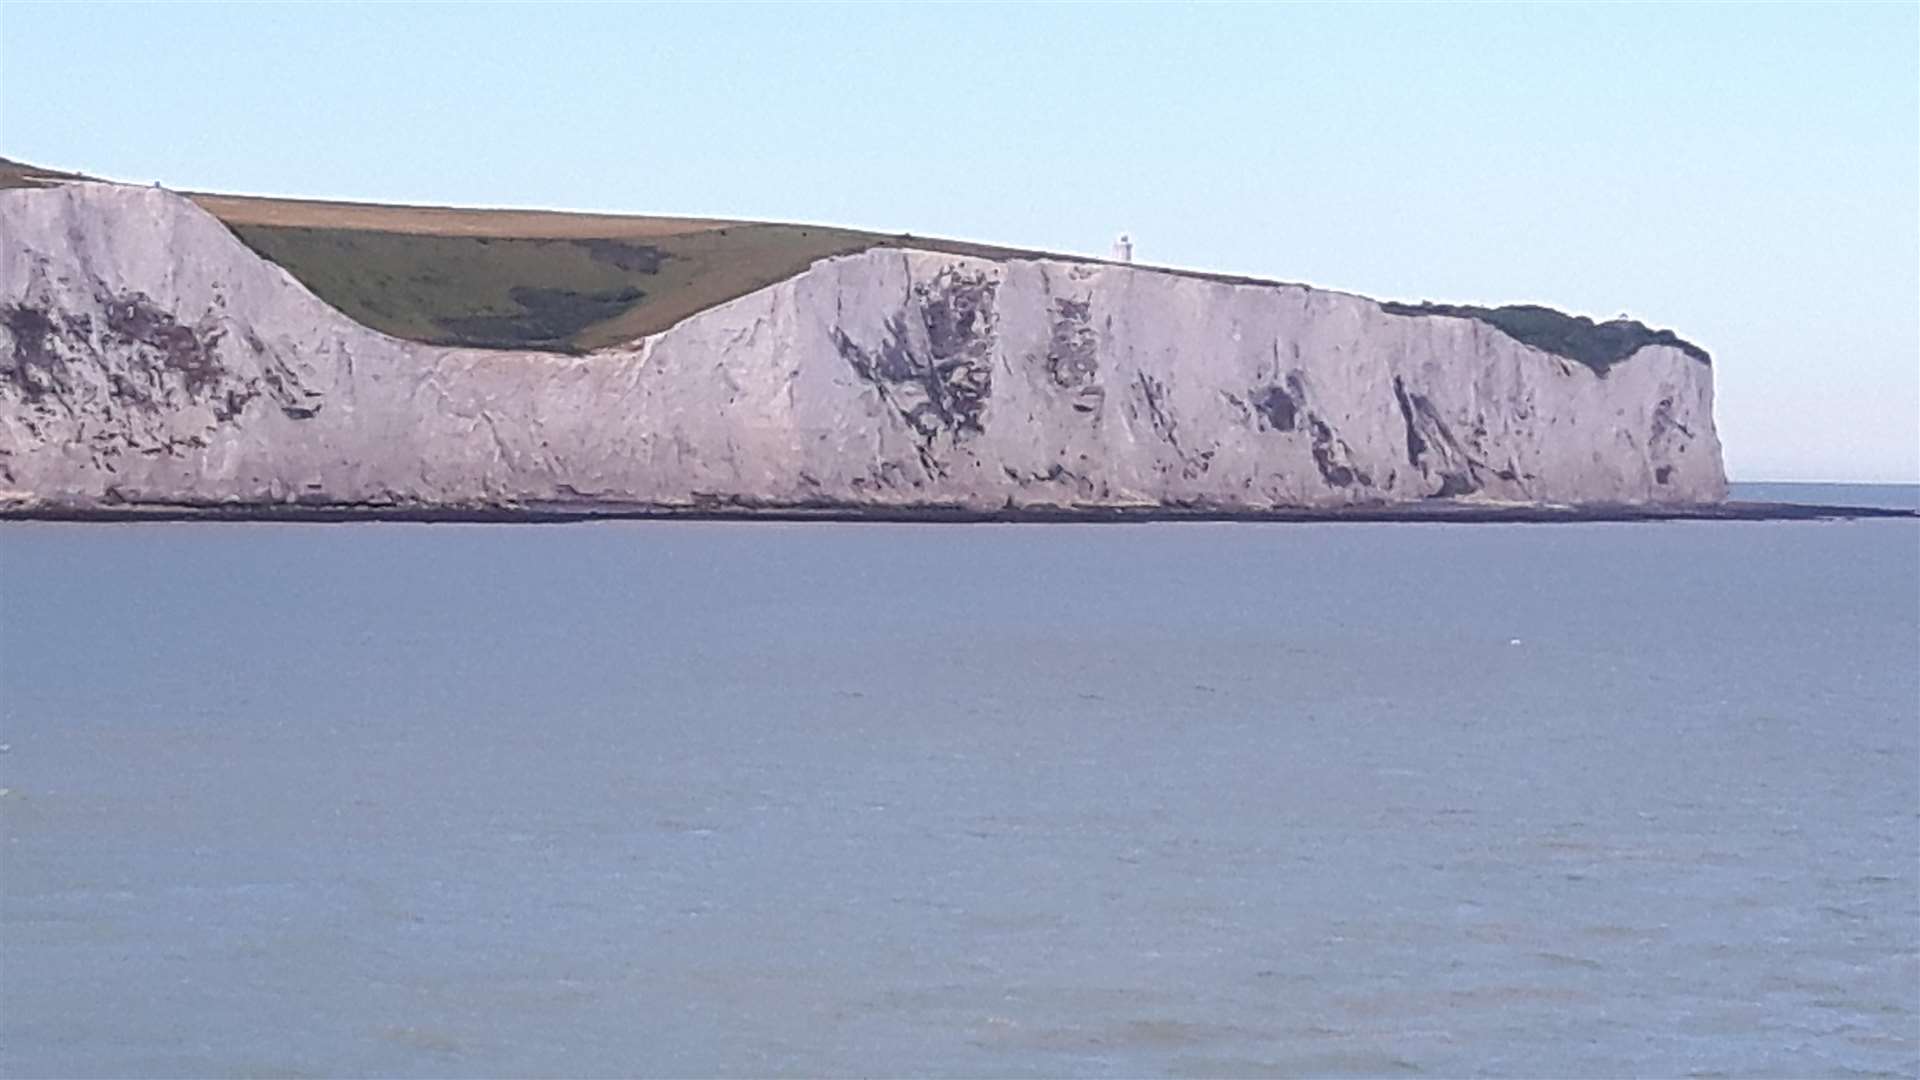 The White Cliffs of Dover is an iconic site for international tourists